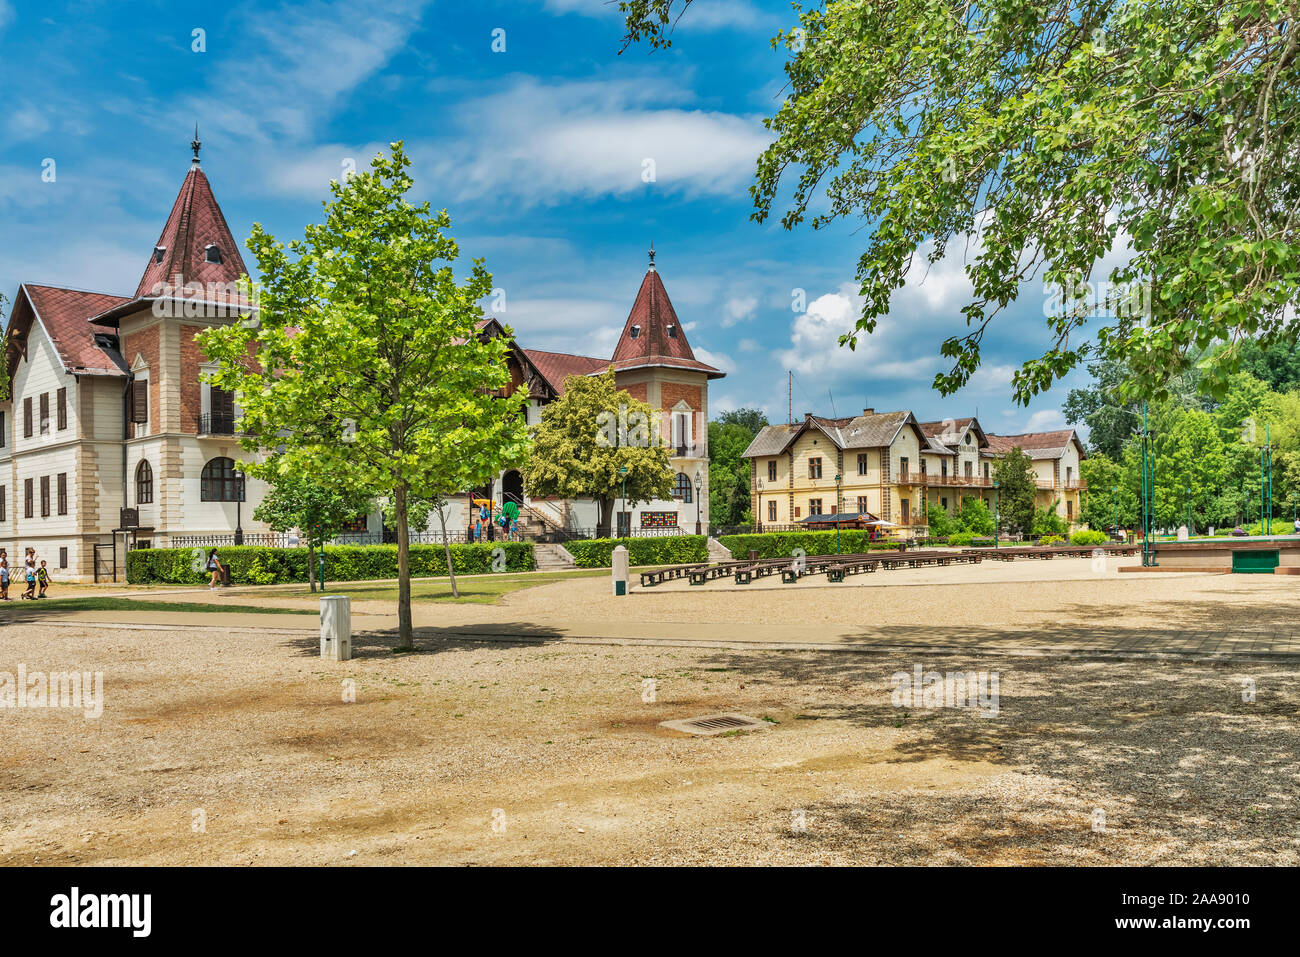 Hotel Hullam was opened in 1894. Next to it is the Hotel Balaton, it was opened in 1895, Keszthely, Zala county, Western Transdanubia, Hungary, Europe Stock Photo